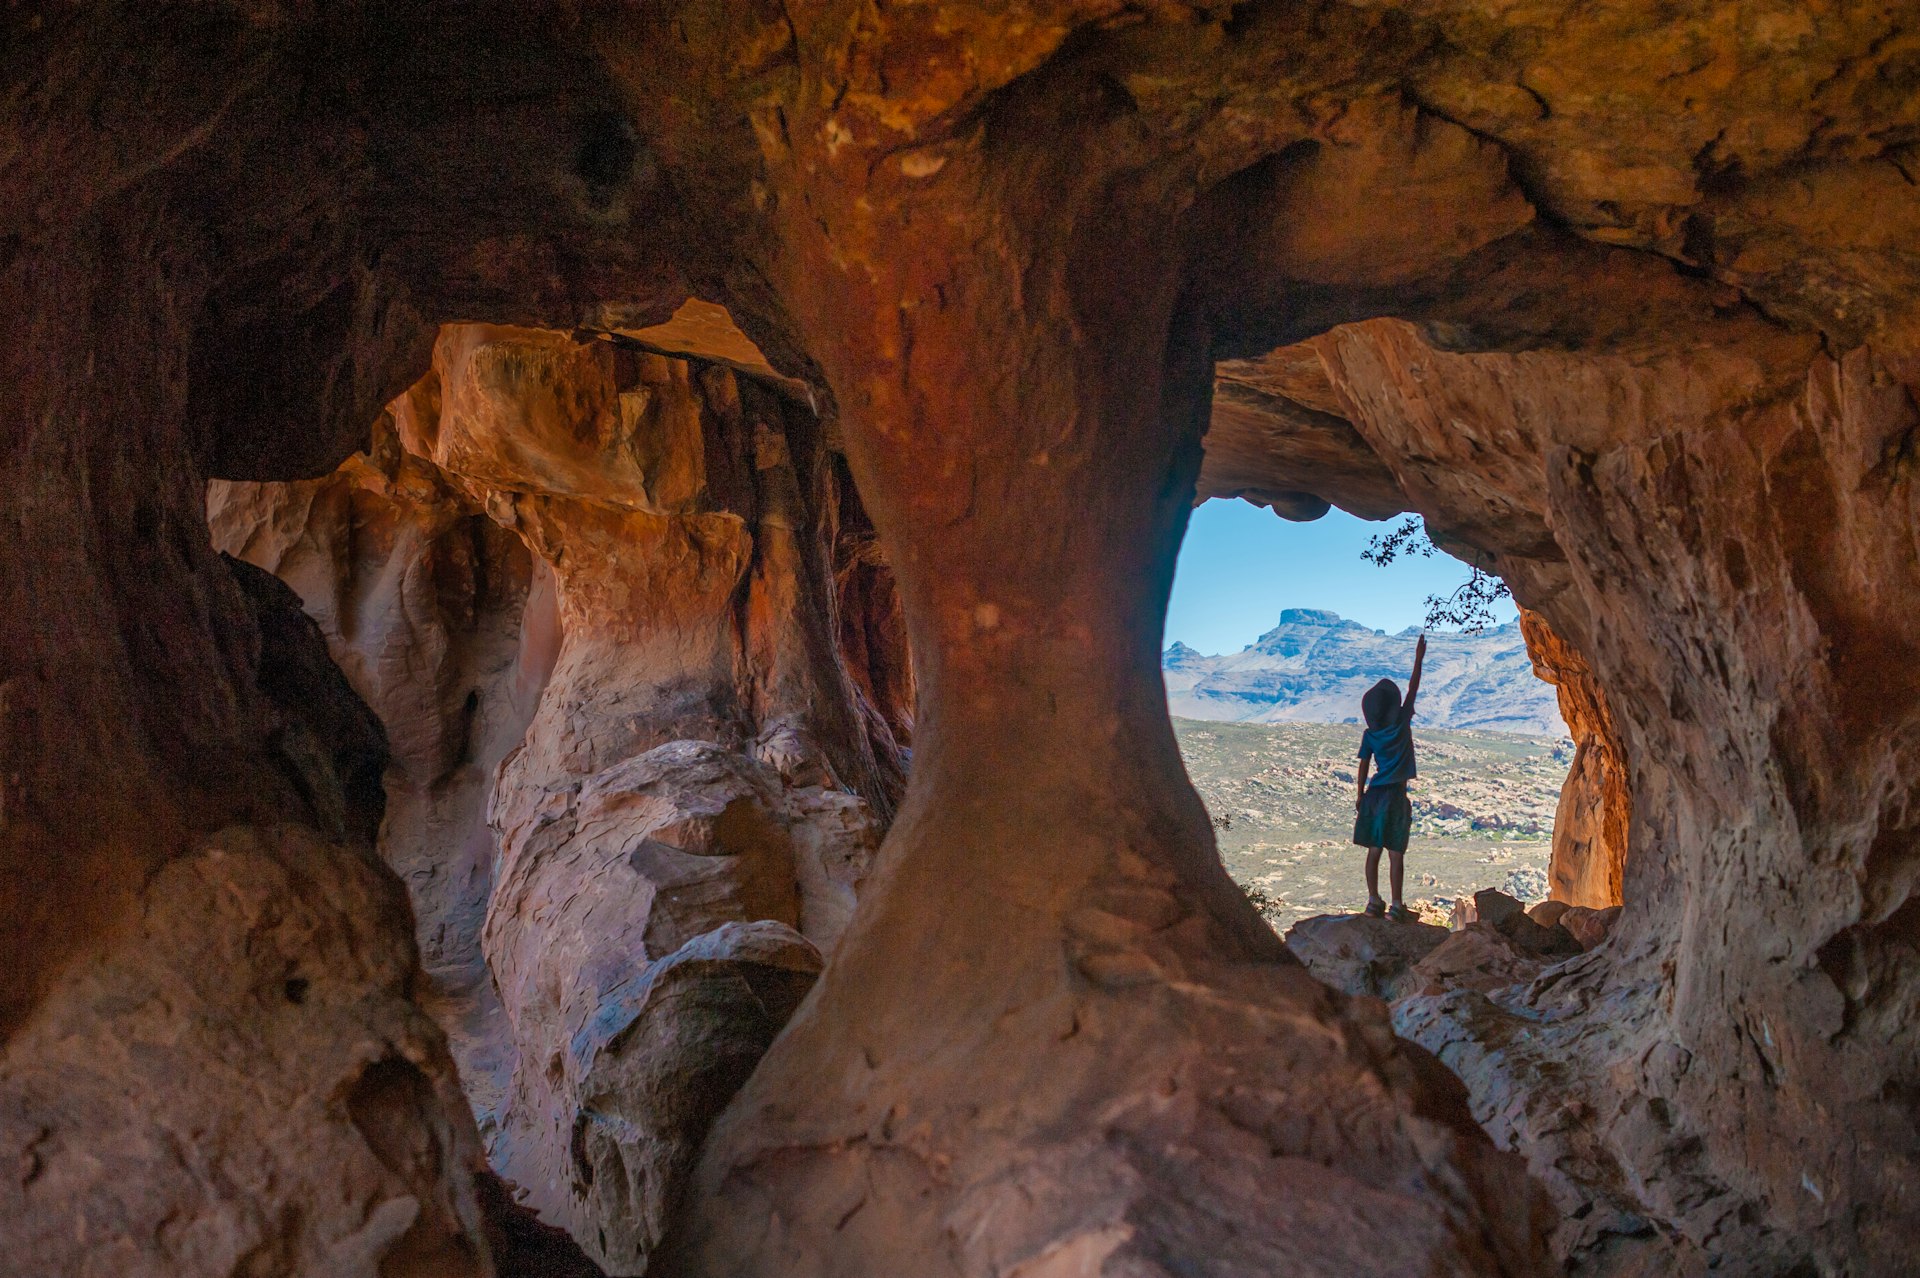 Young boy standing in a cave opening looking out onto the Cederberg Wilderness Area in South Africa